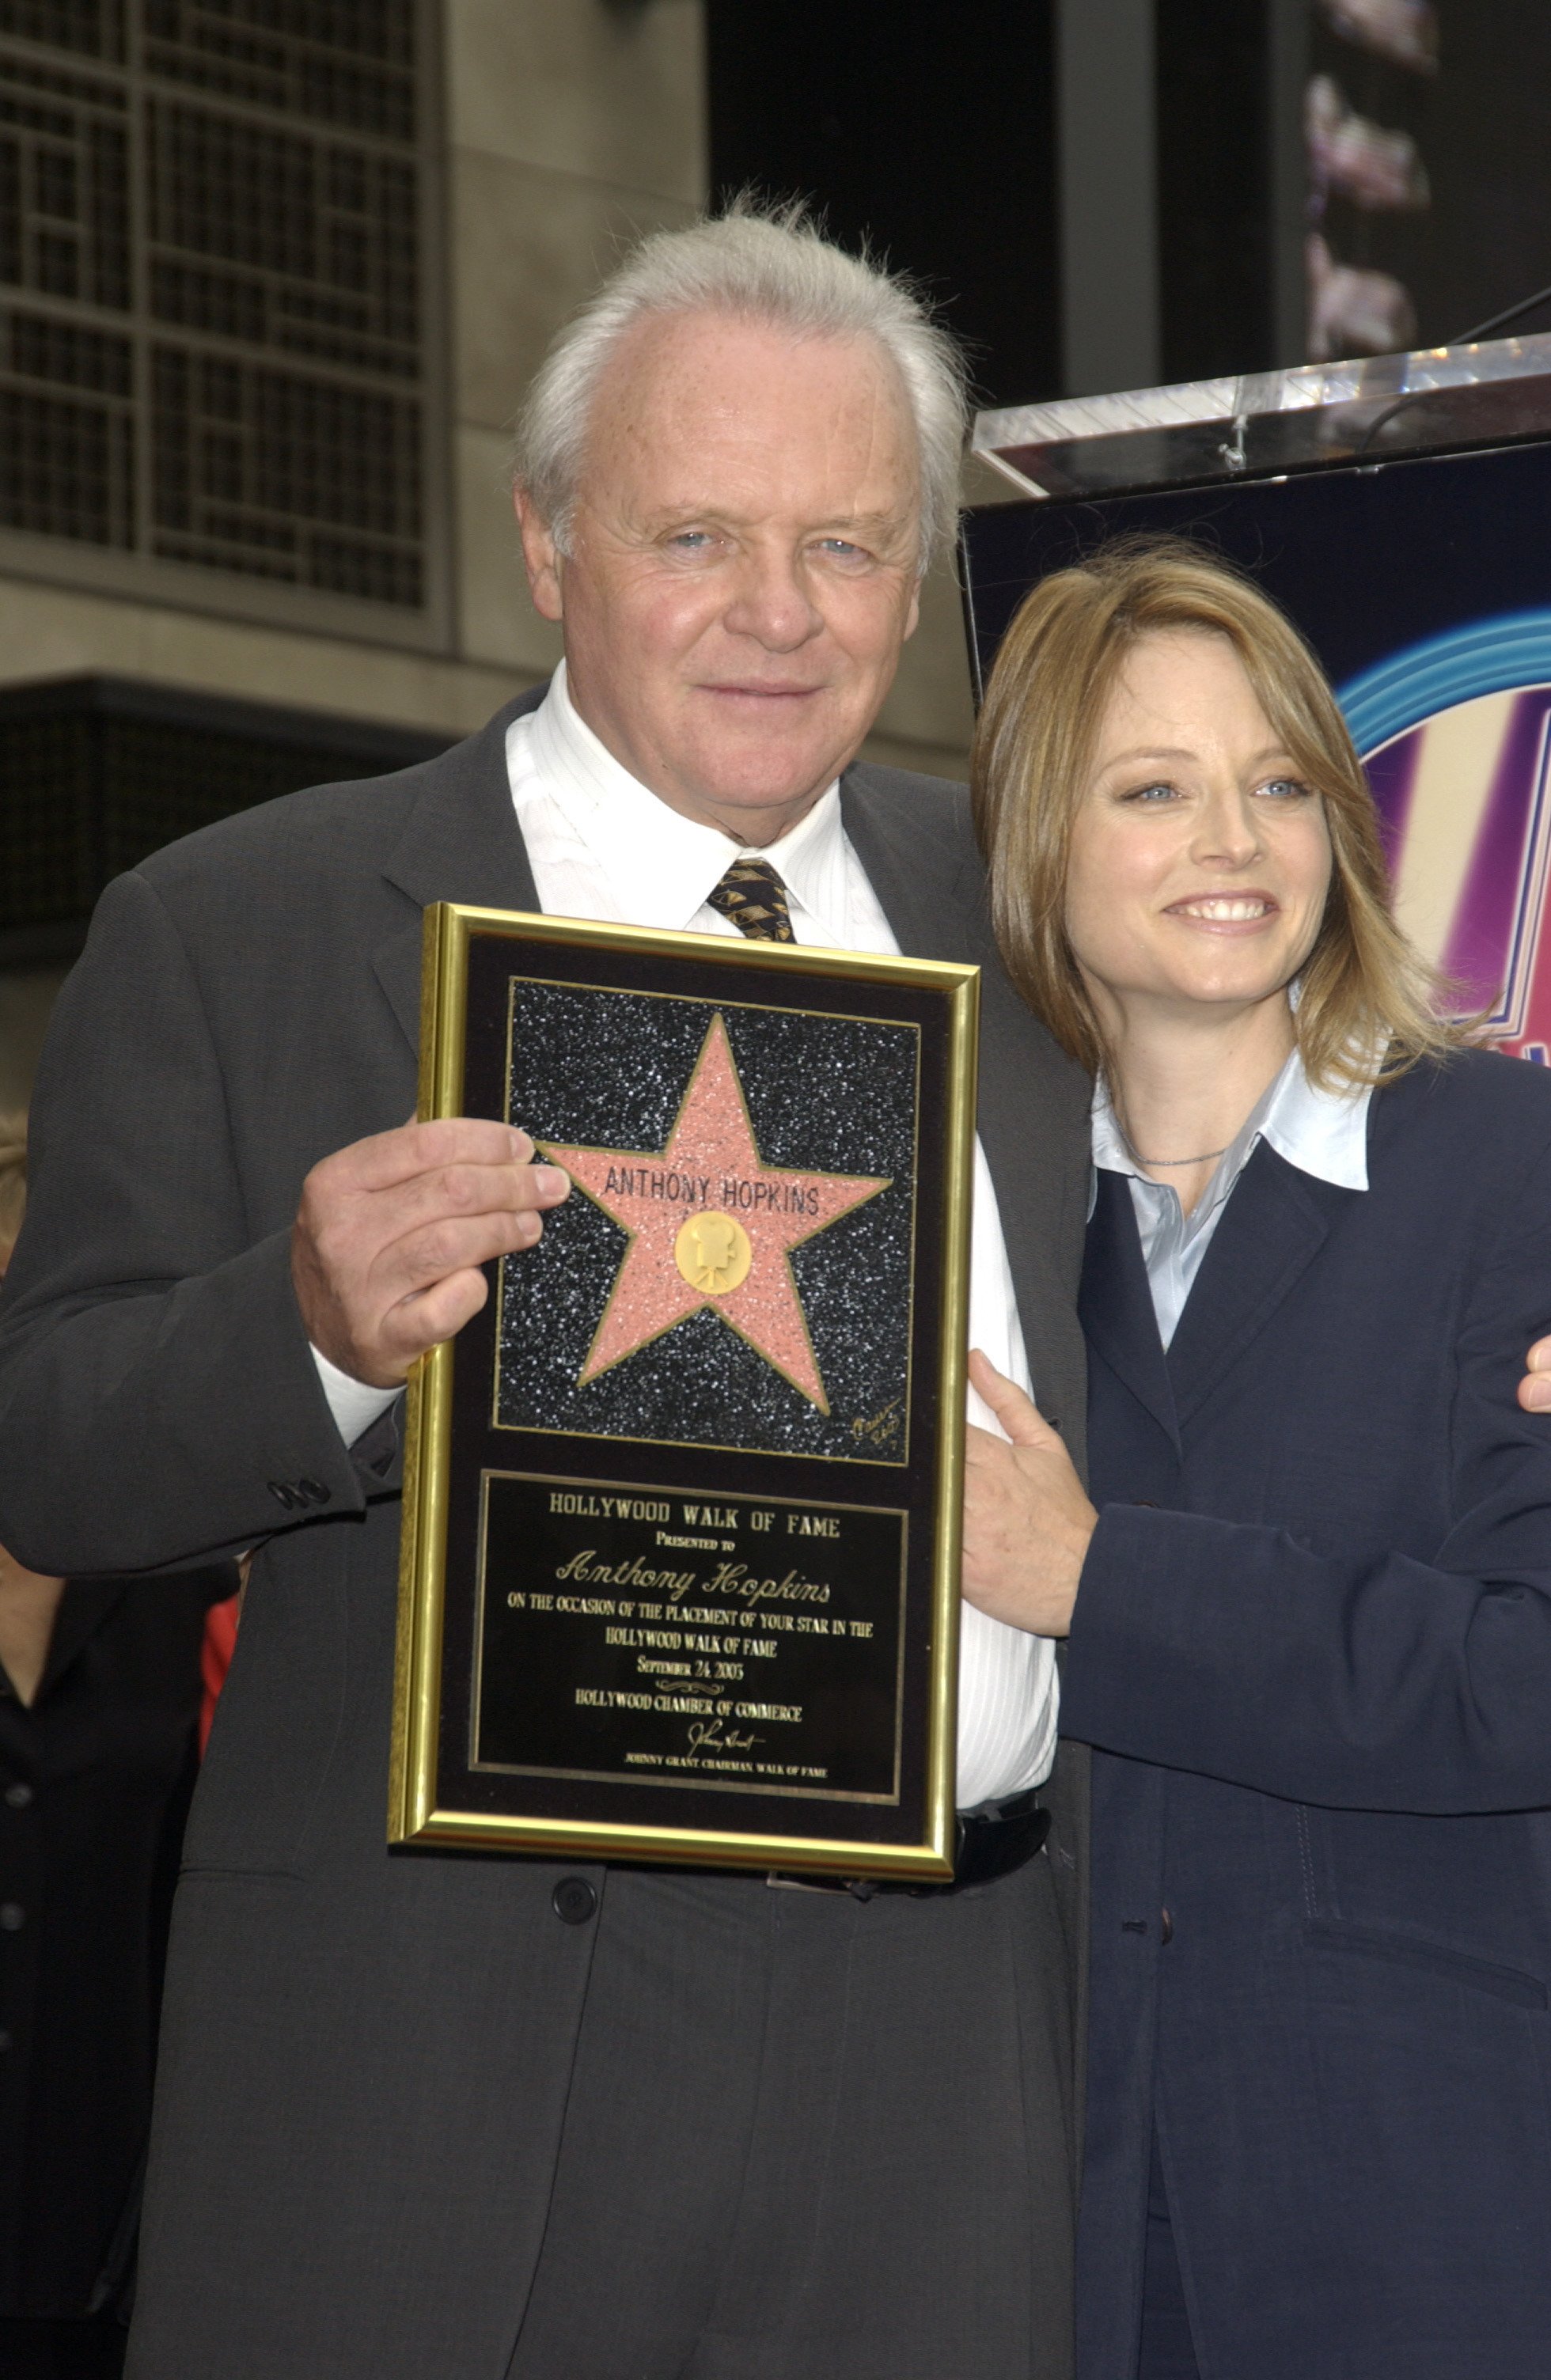 Sir Anthony Hopkins receiving his Hollywood Star honor, with actress, Jodie Hopkins September, 2003. | Photo: Shutterstock.